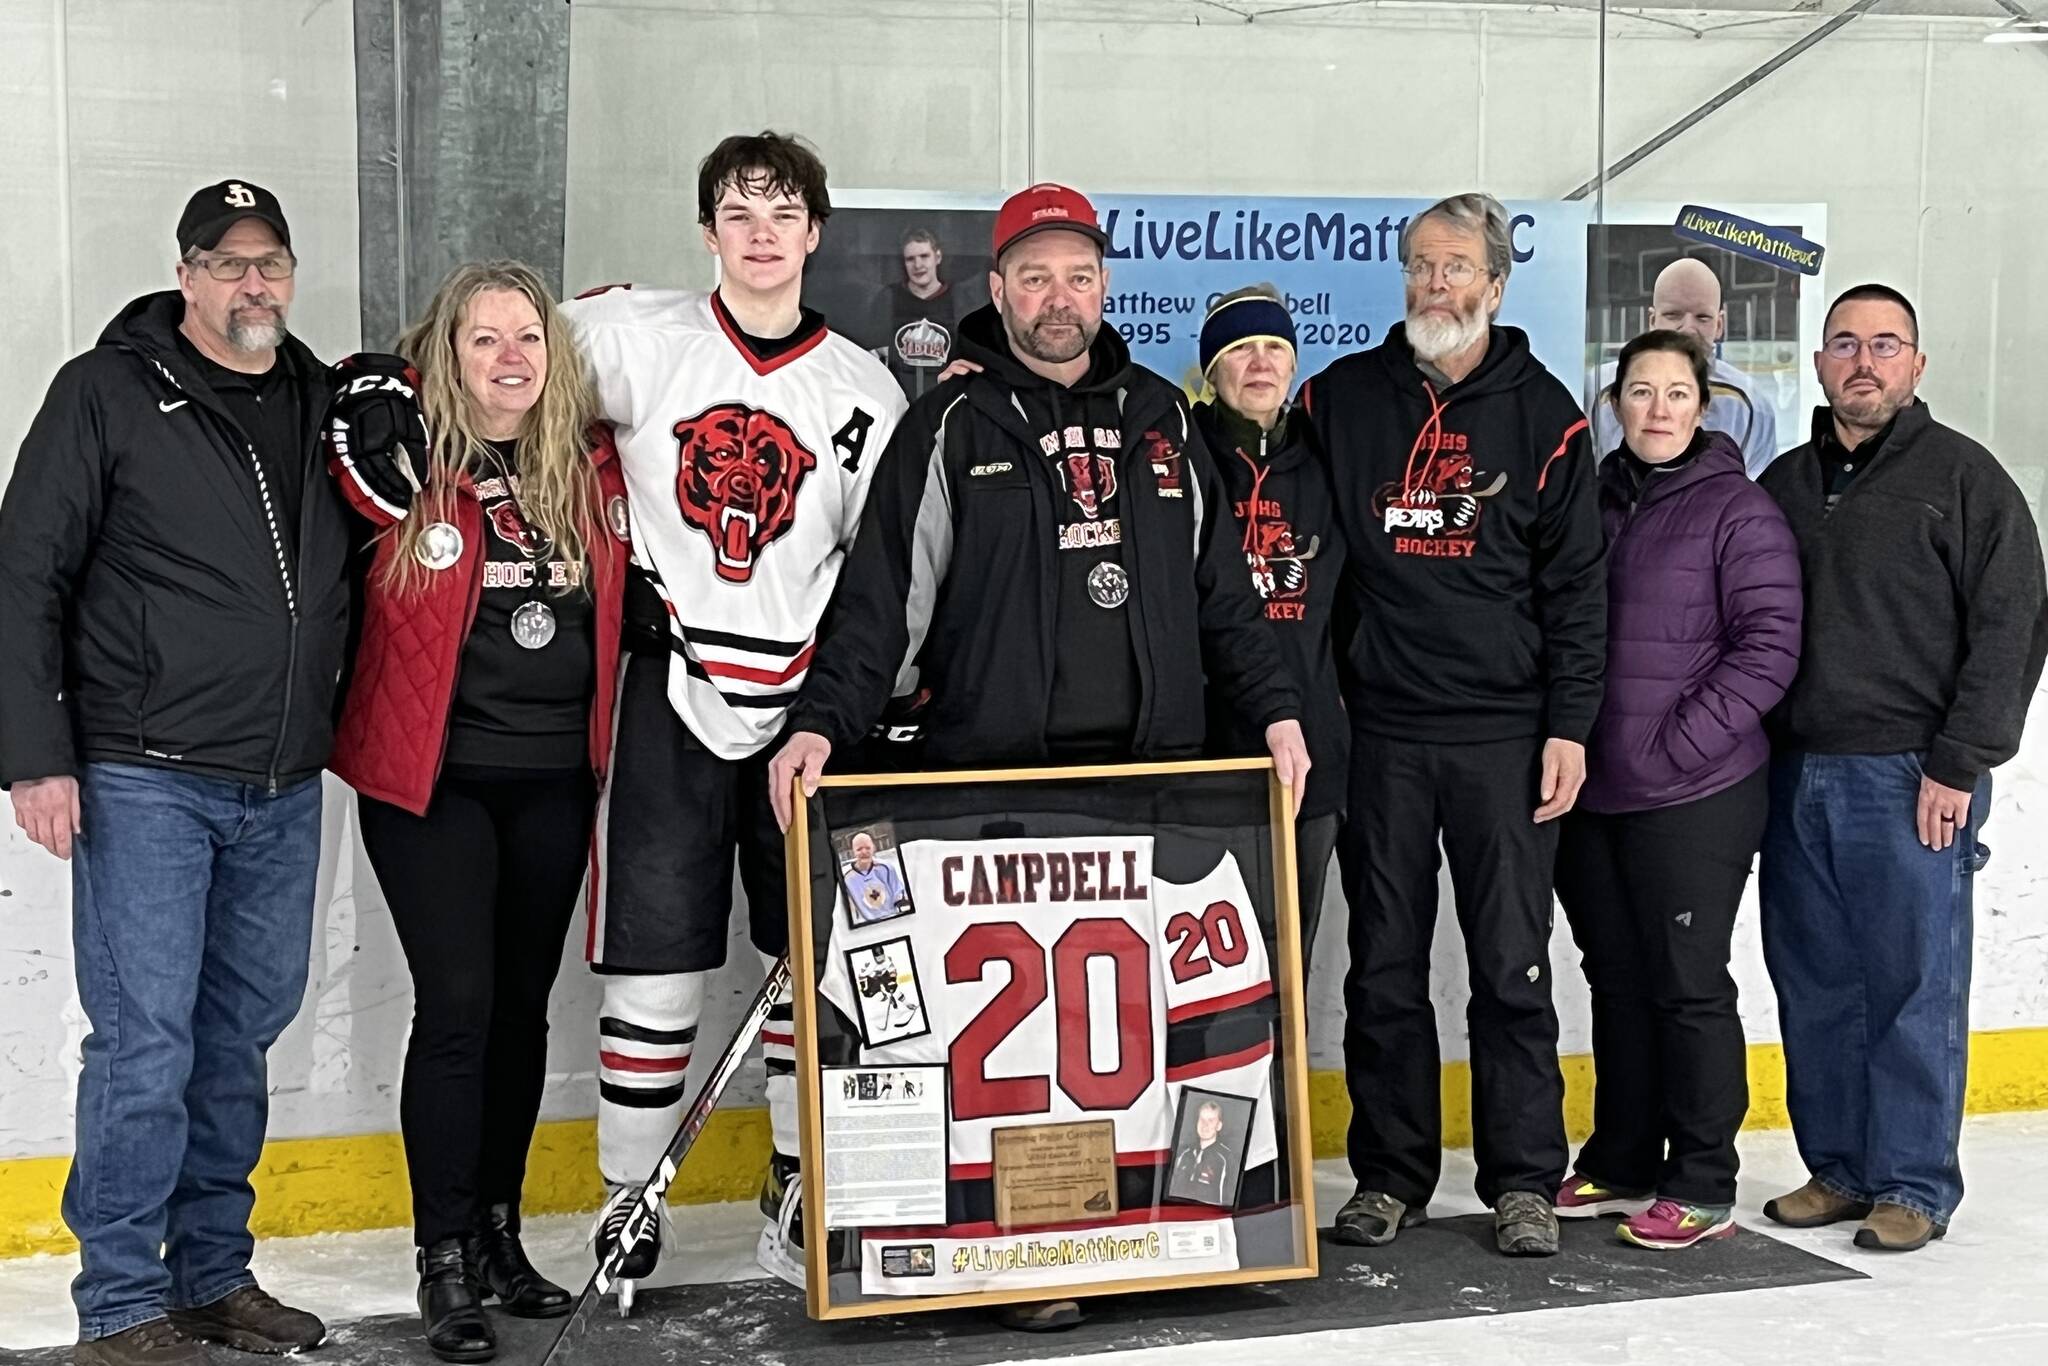 Photos by Jonson Kuhn/Juneau Empire The Campbell family, along with former JDHS hockey coach Jay Lloyd, display a framed jersey in honor of Matthew Campbell, whose number was retired during a special ceremony Saturday at Treadwell Arena.